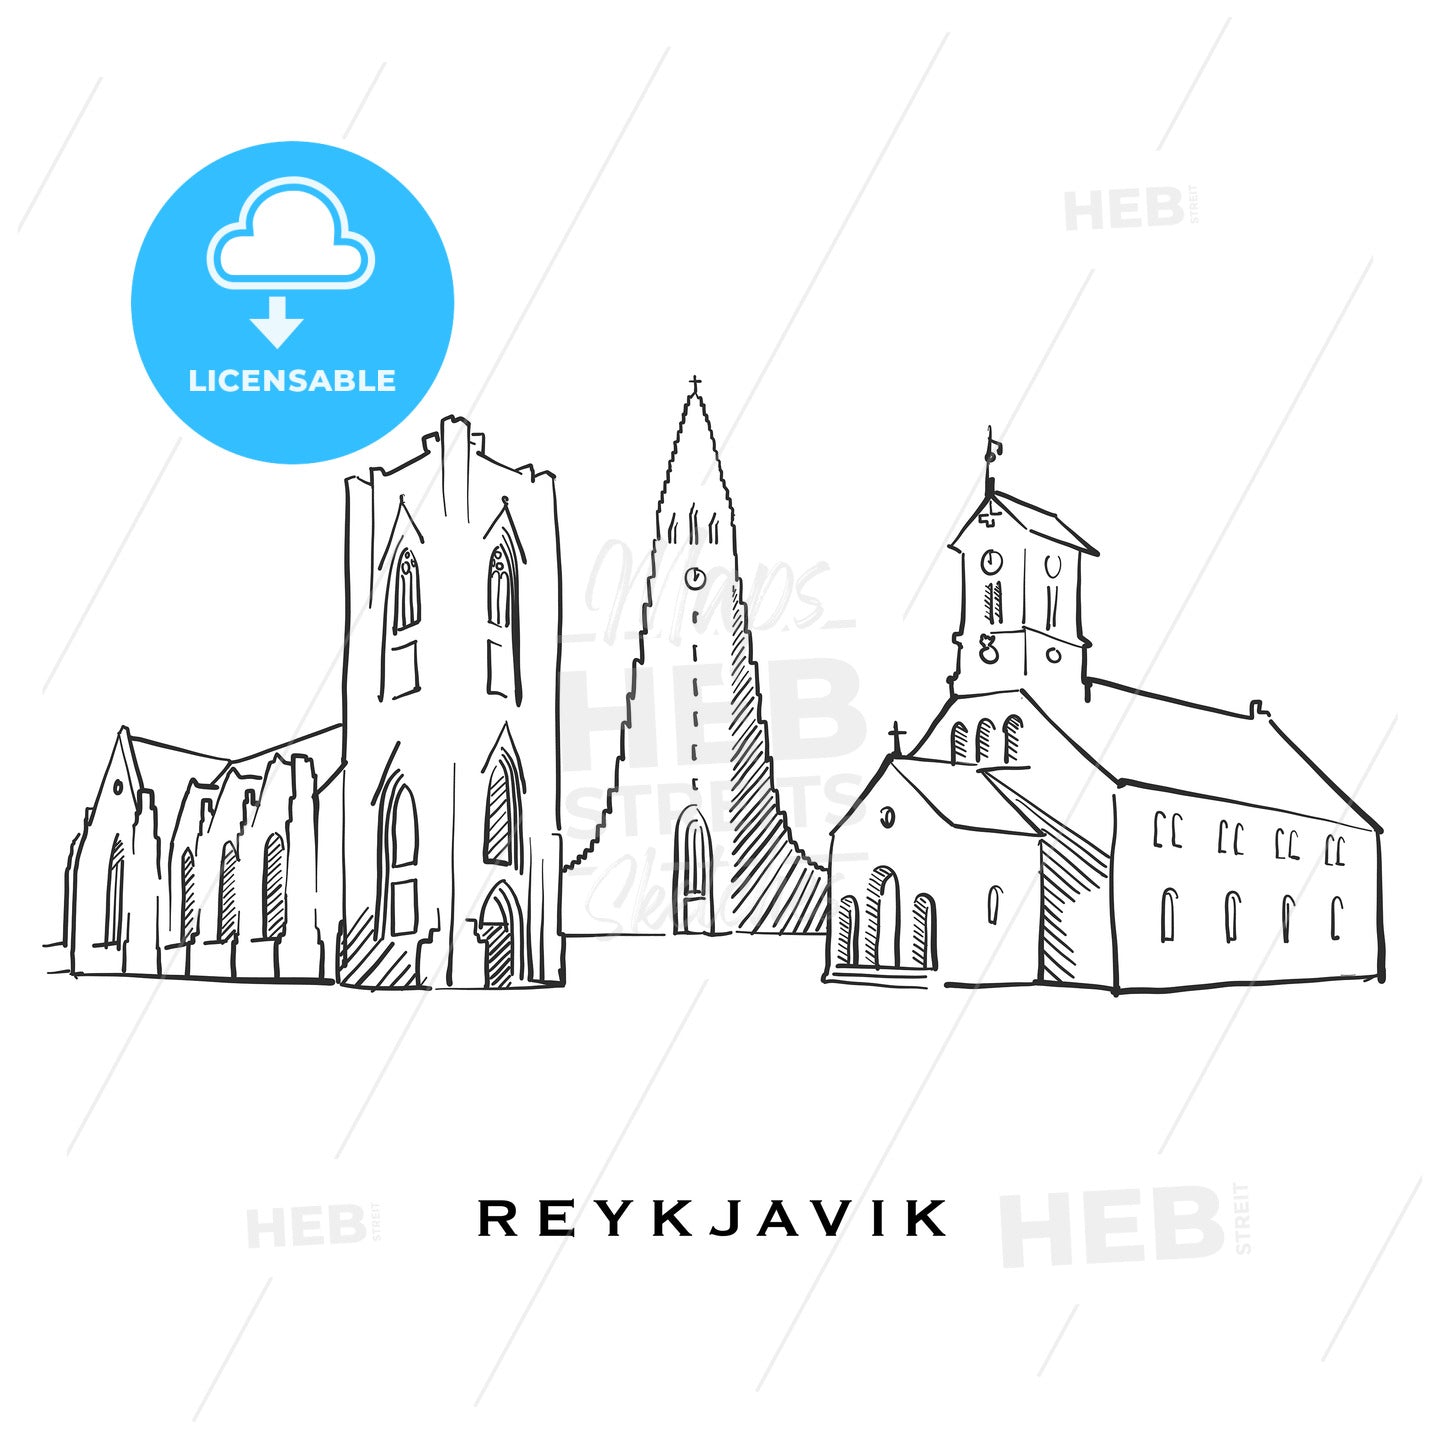 Reykjavik Iceland famous architecture – instant download